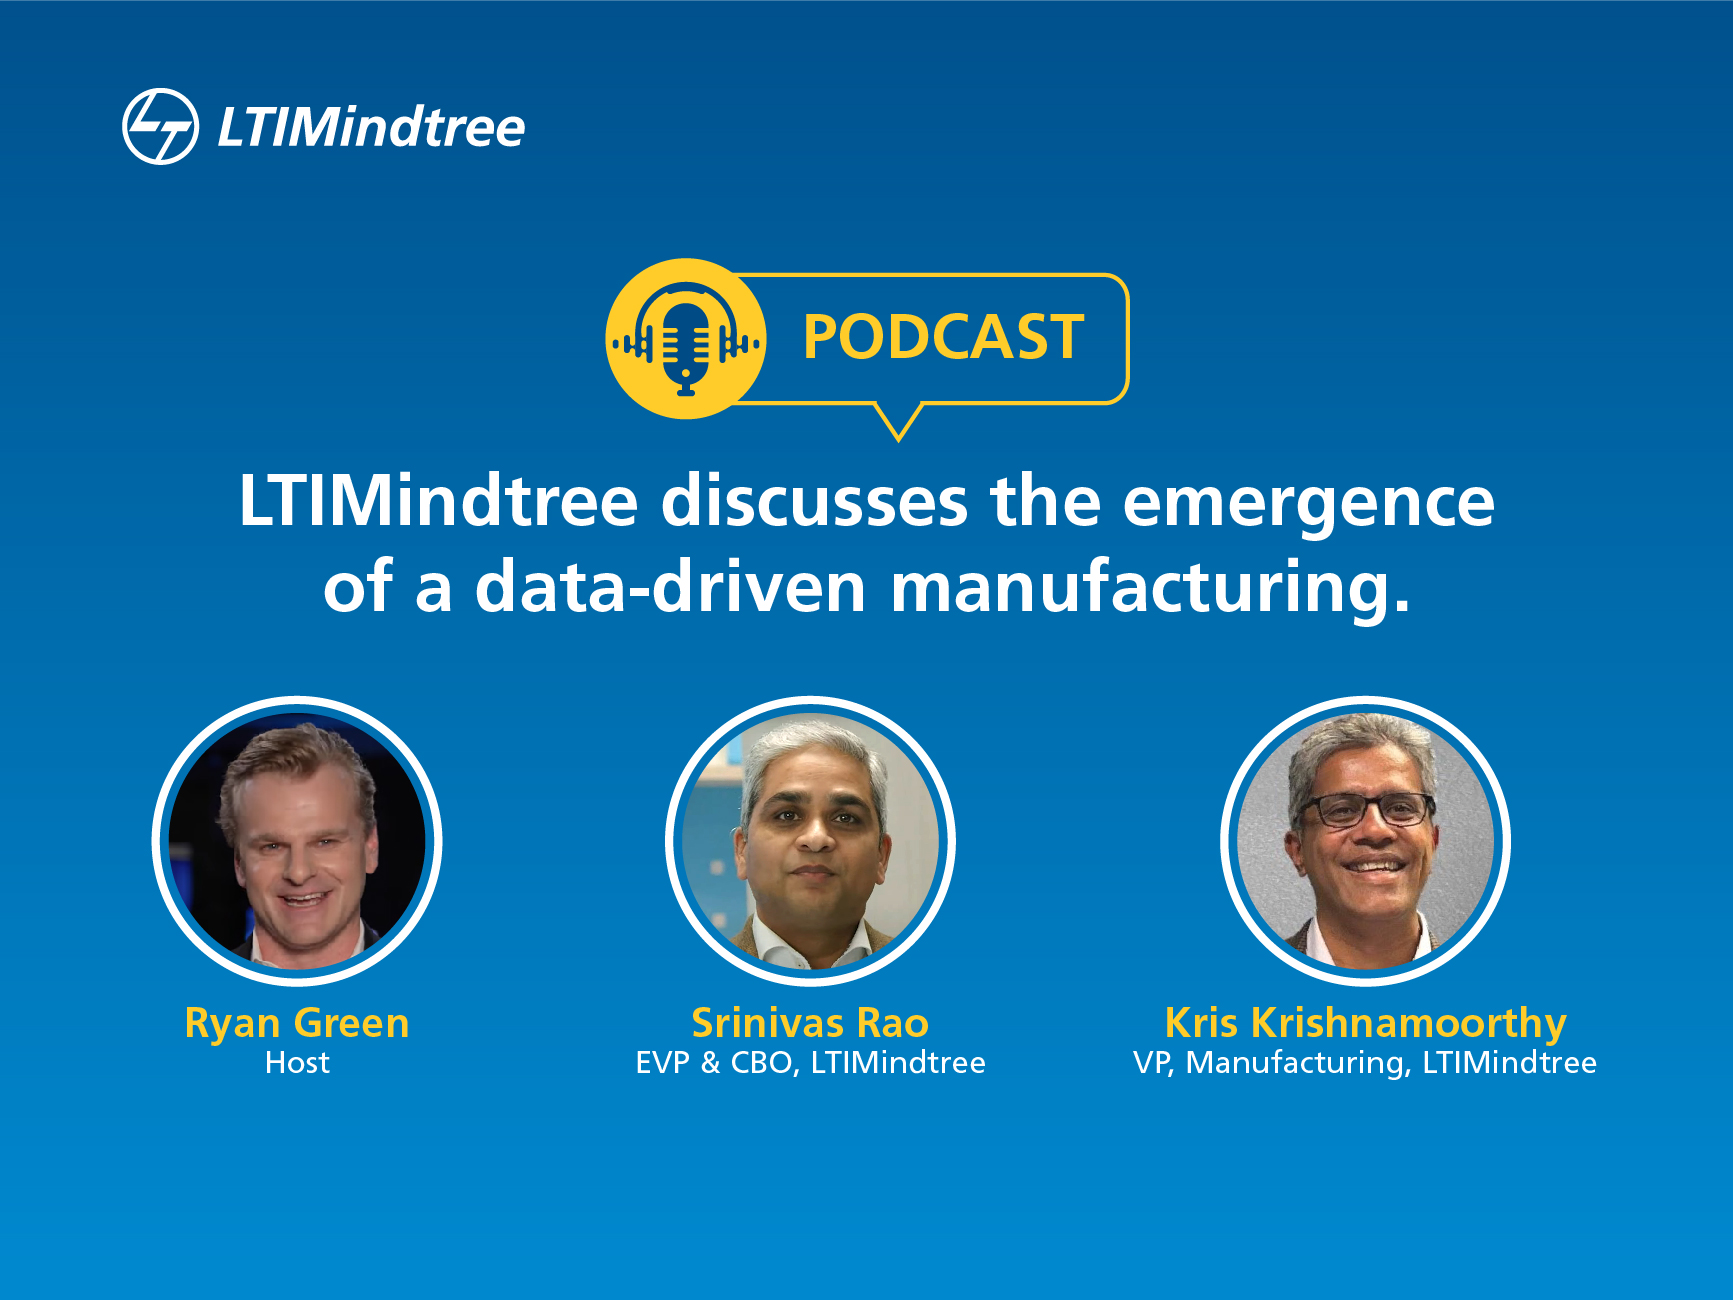 LTIMindtree Discusses the Emergence of a Data-Driven Manufacturing Renaissance with “Data Cloud Now” host Ryan Green